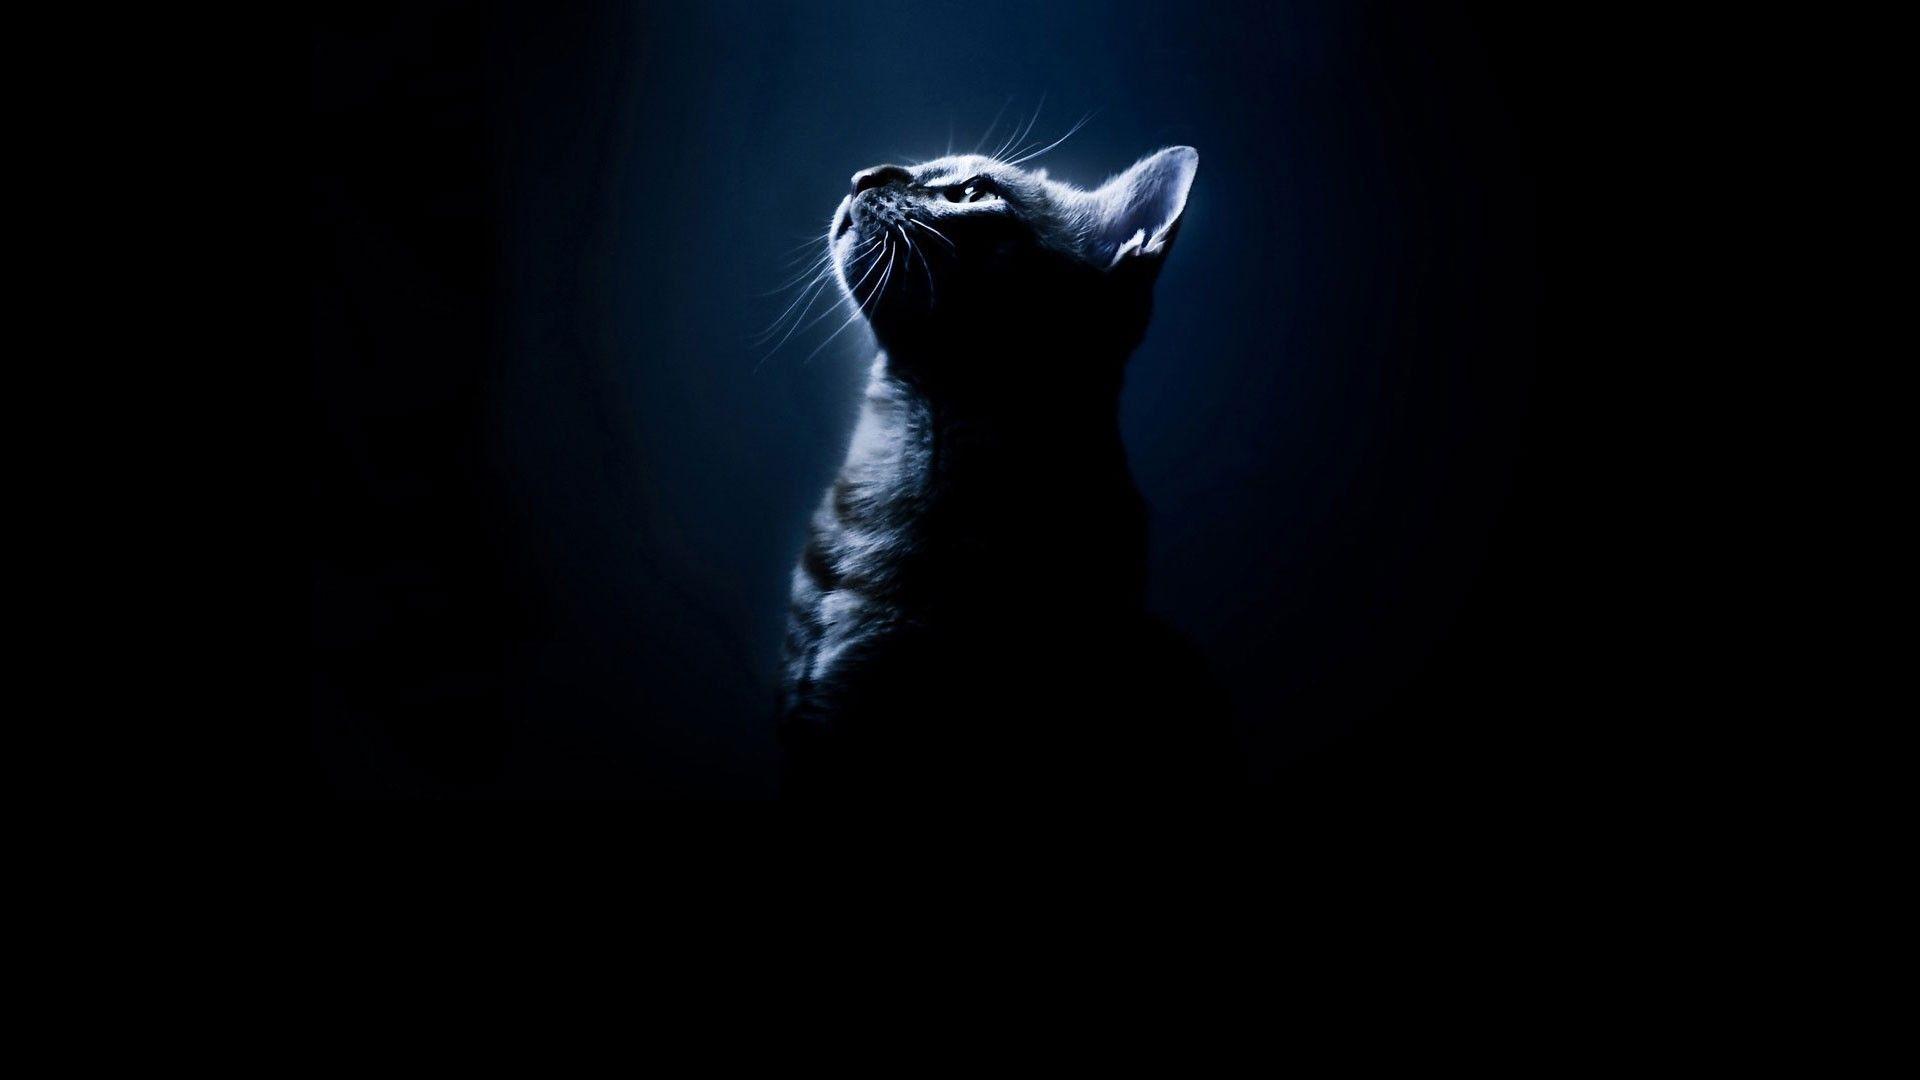 Cats: Silhouettes Cats Black Animals Bengal Cat Photo Gallery